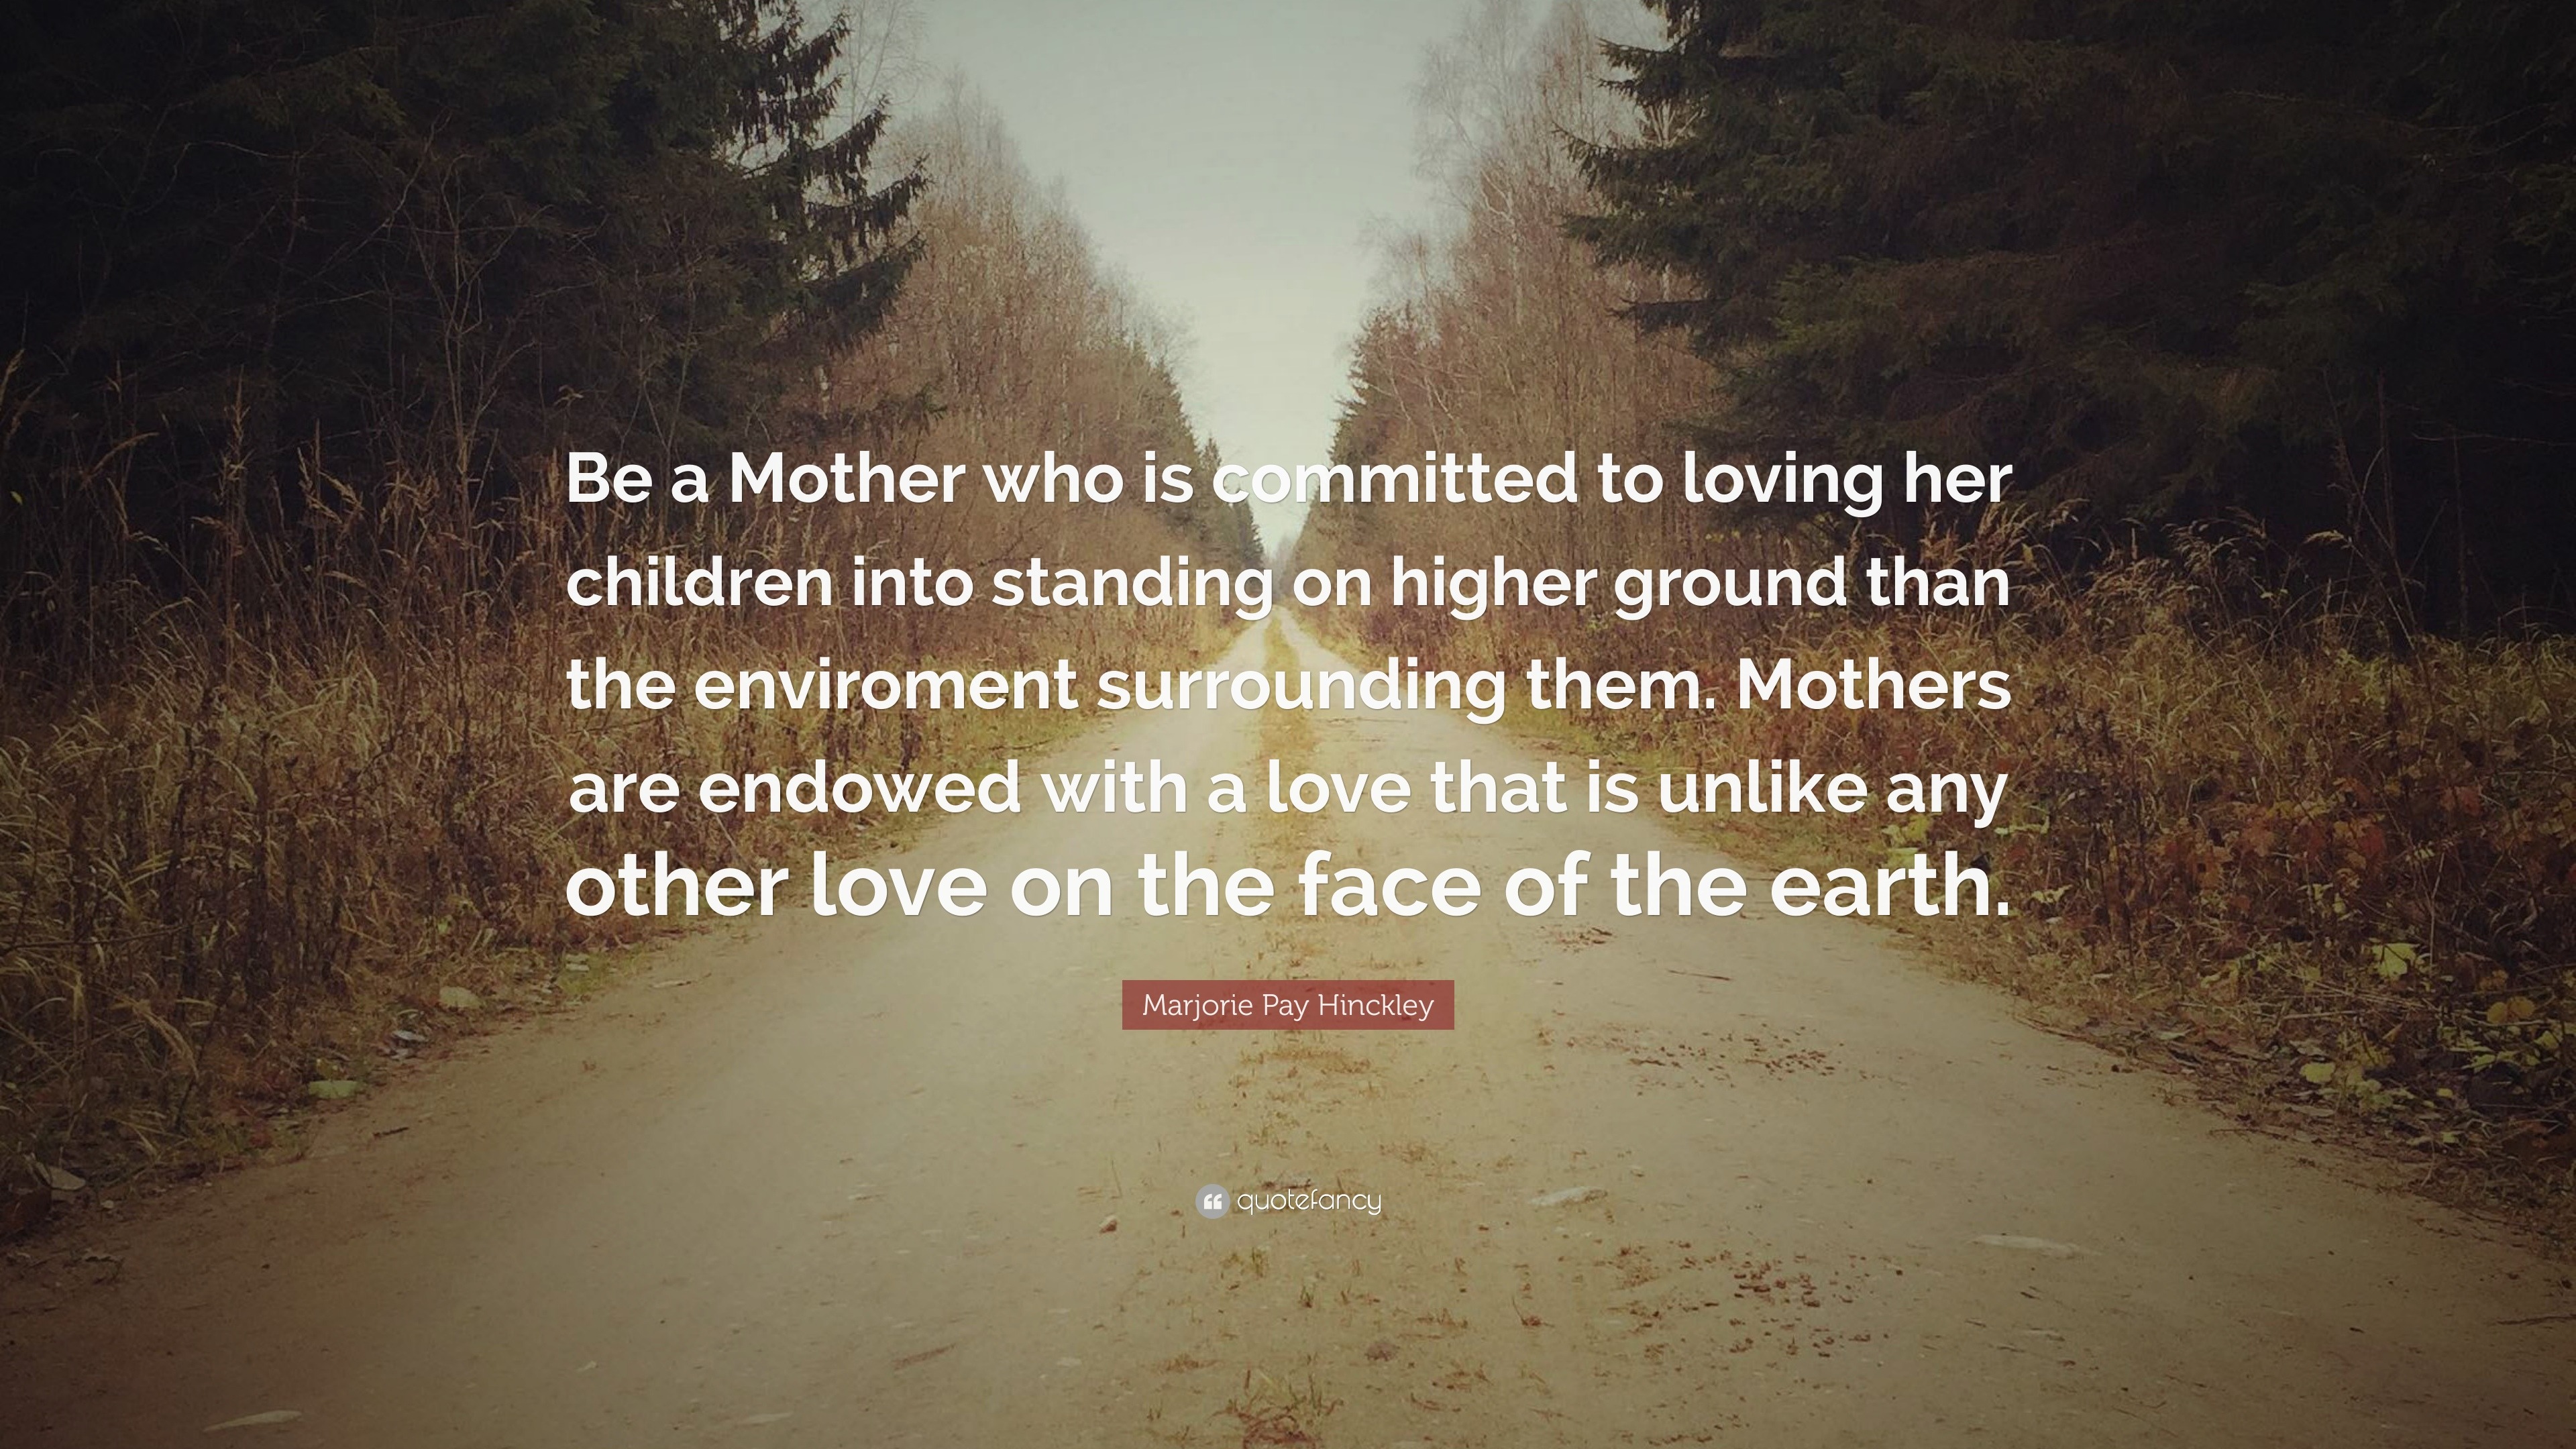 Marjorie Pay Hinckley Quote “Be a Mother who is mitted to loving her children